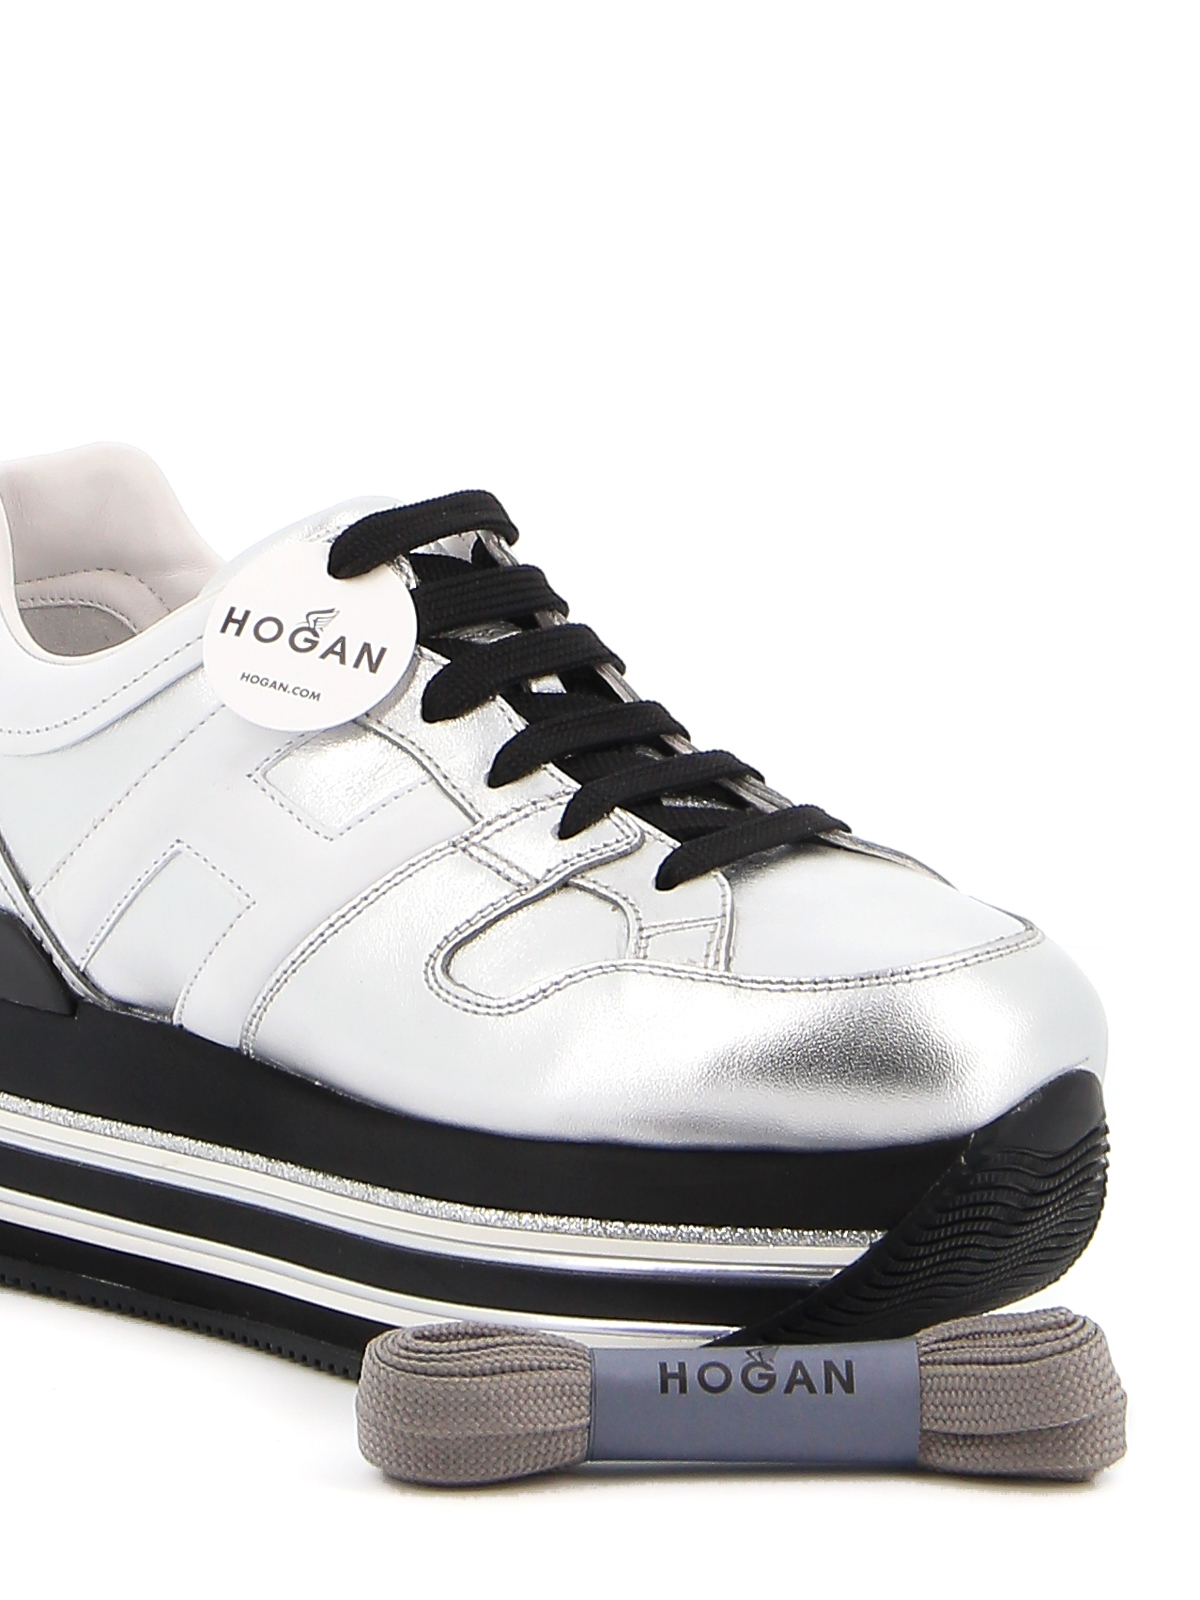 Trainers Hogan - Maxi Platform H222 leather sneakers - HXW5330T548I810906